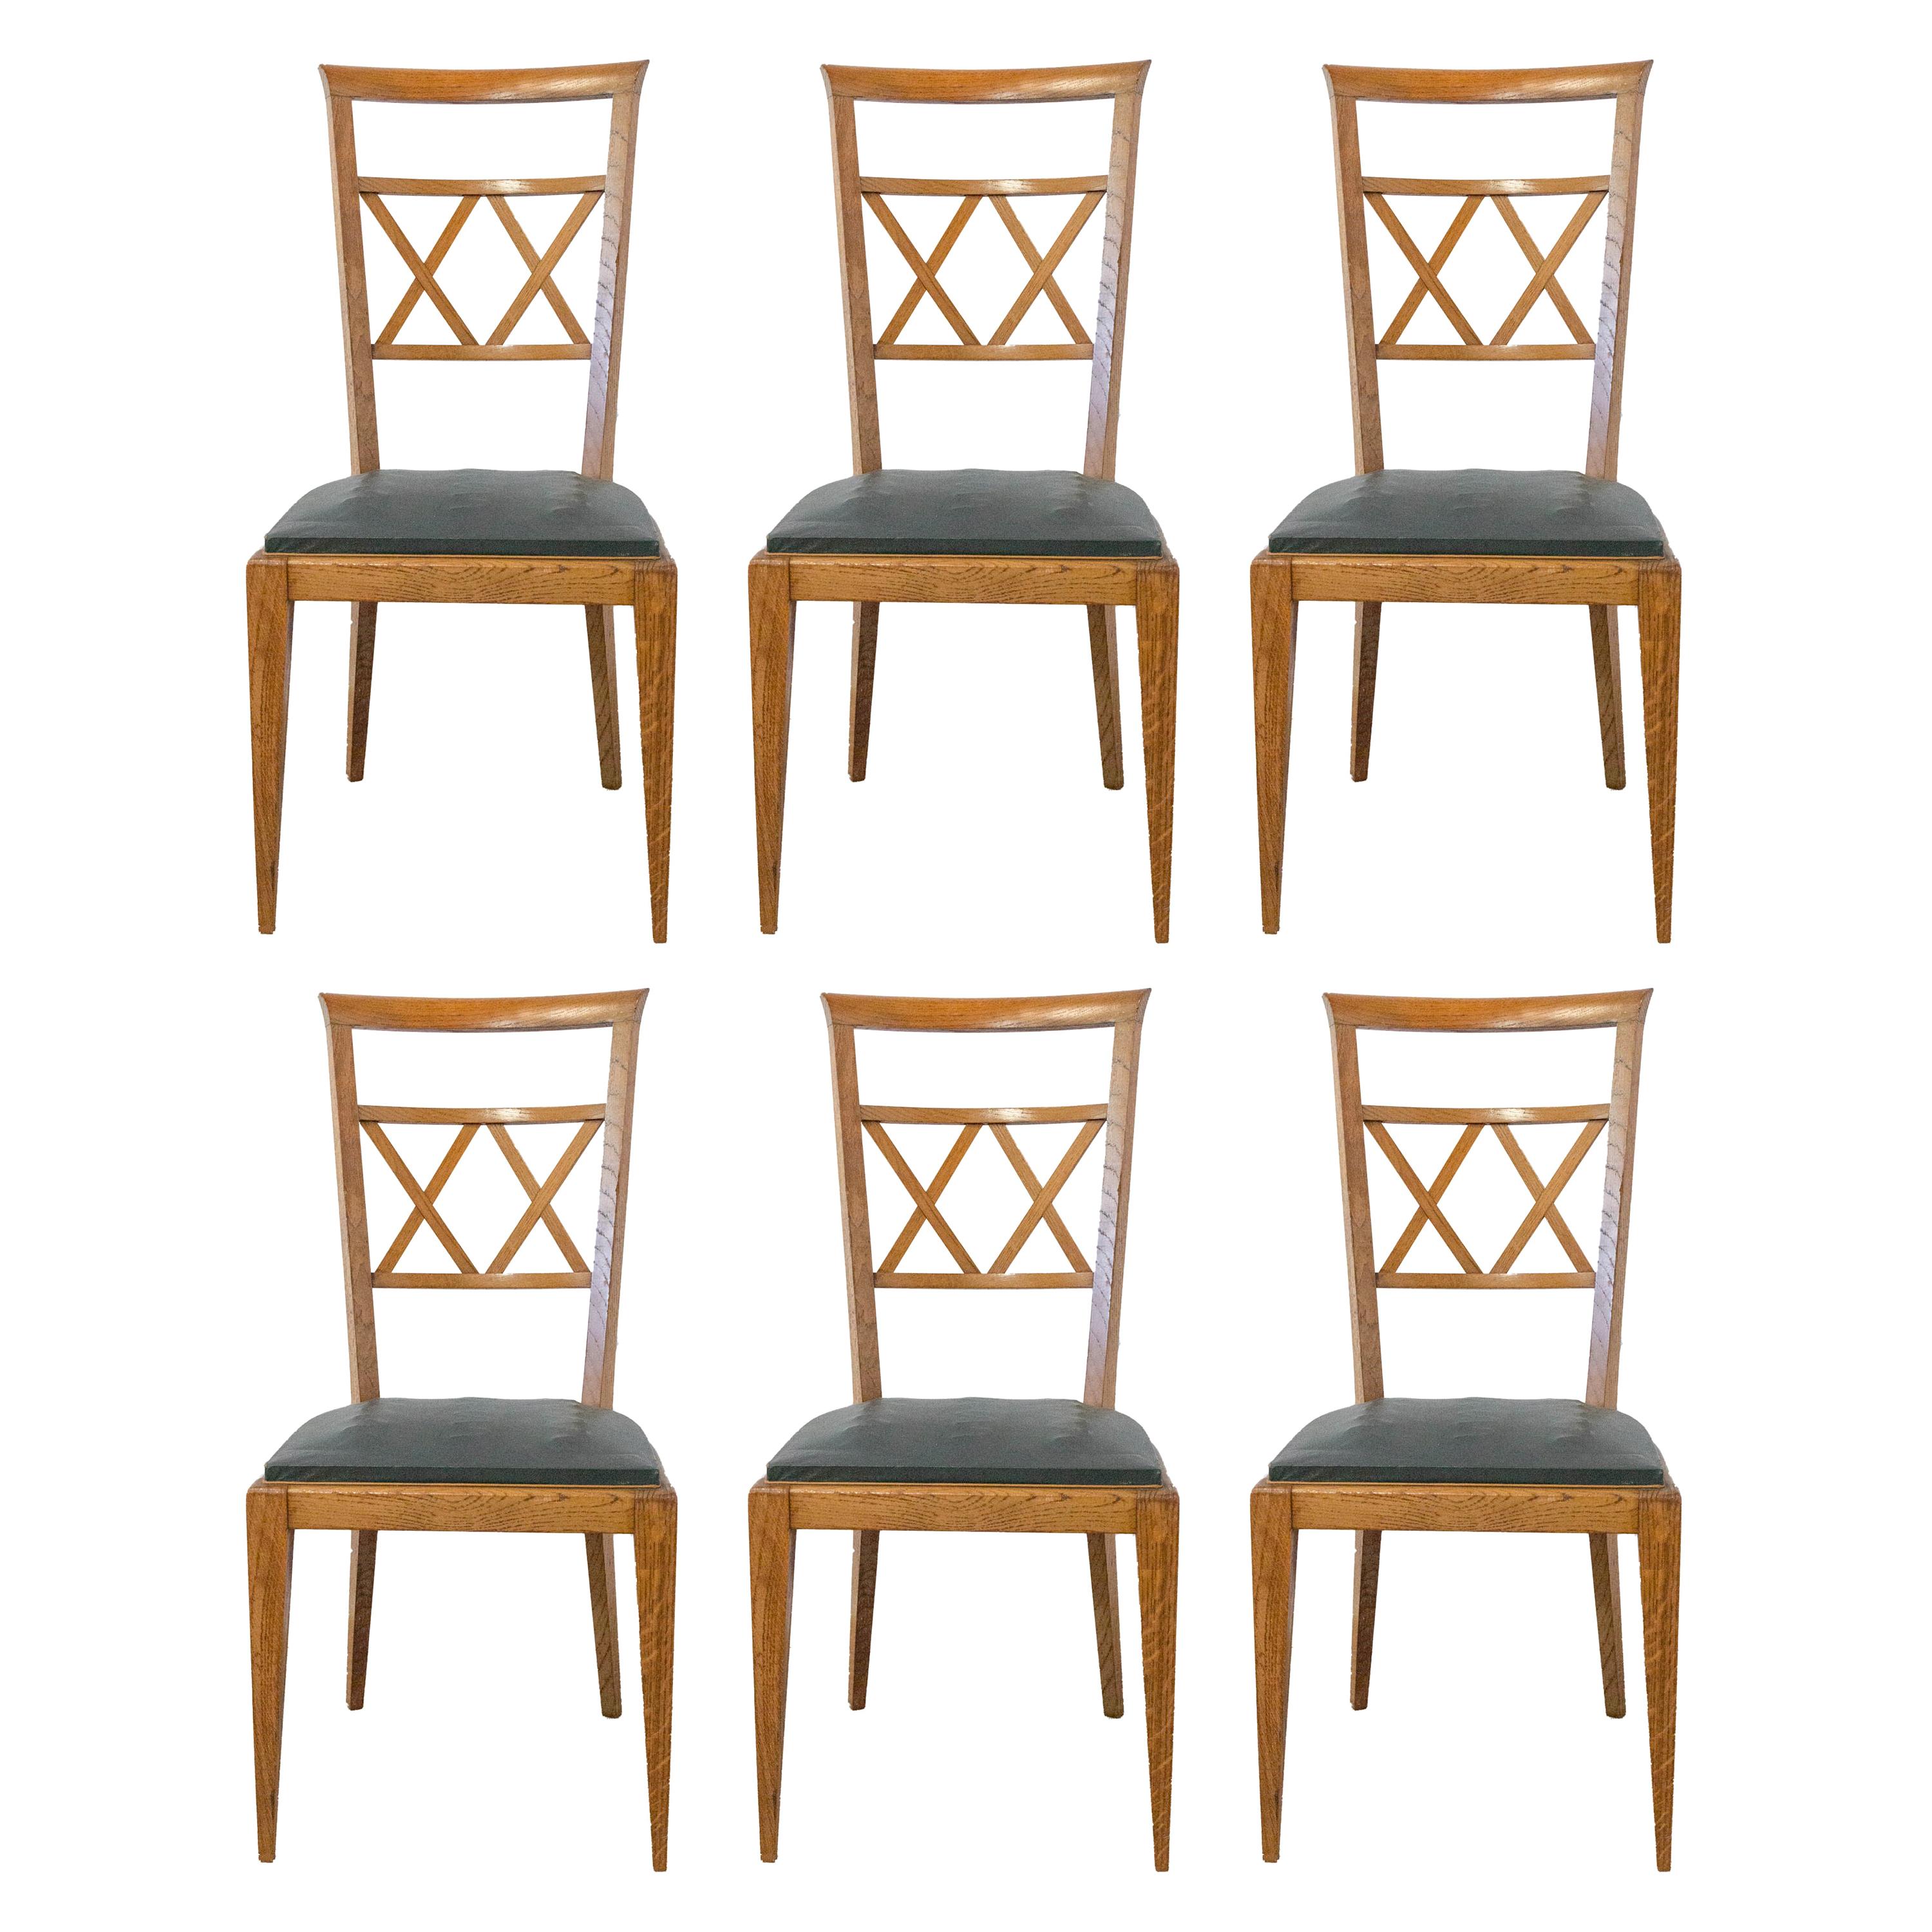 Six Dining Chairs Midcentury French Crossed Wood Backs, circa 1950